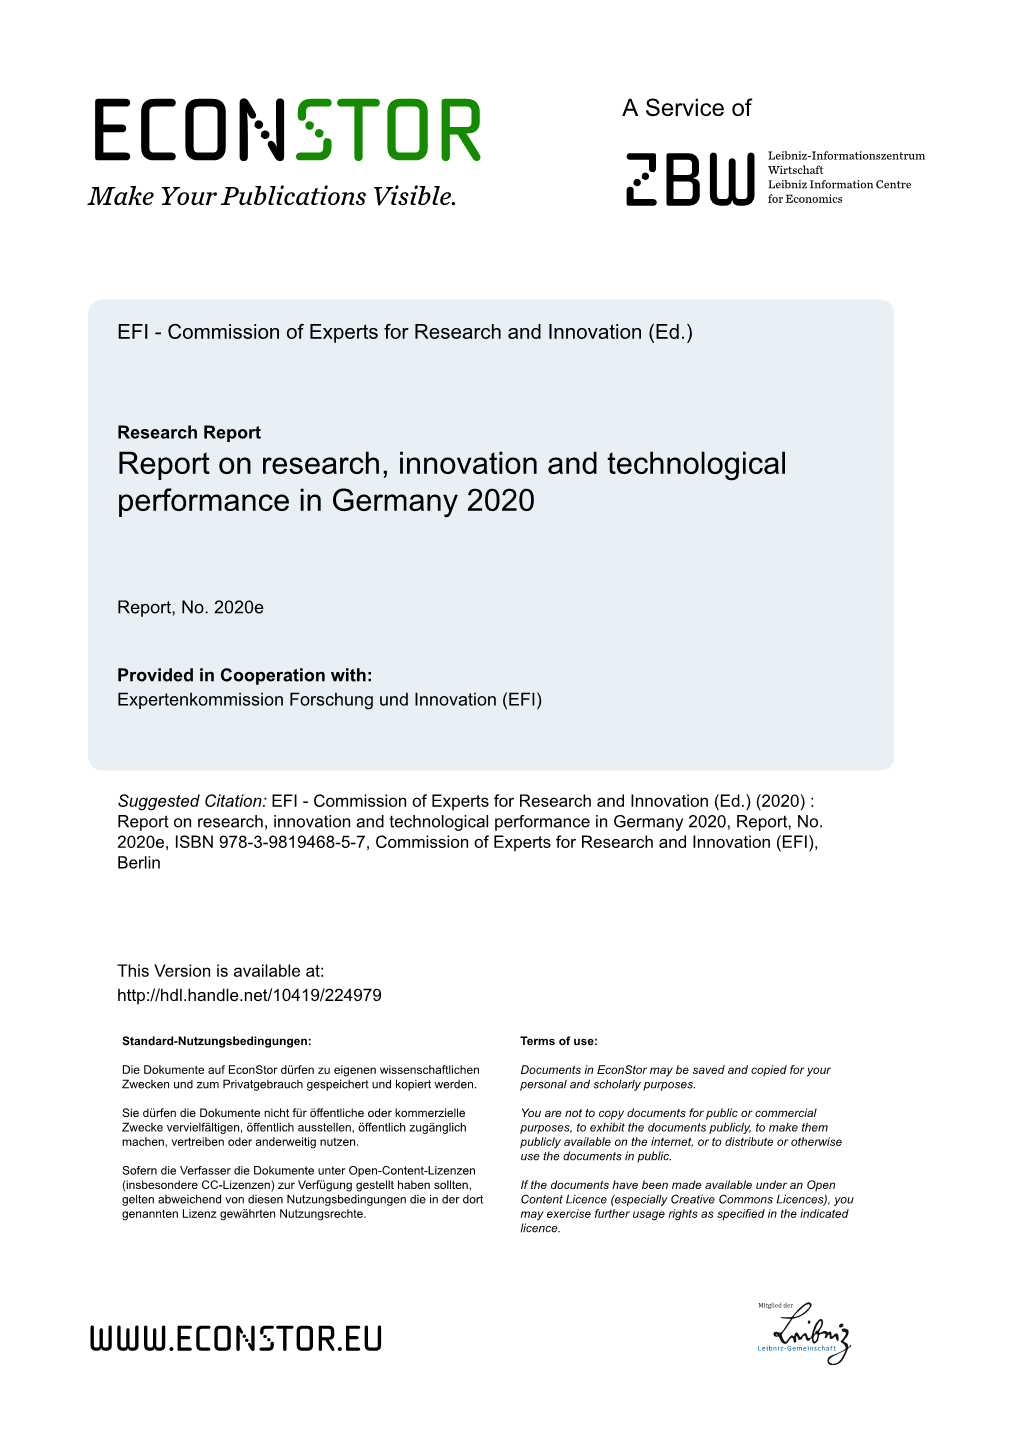 Report on Research, Innovation and Technological Performance in Germany 2020